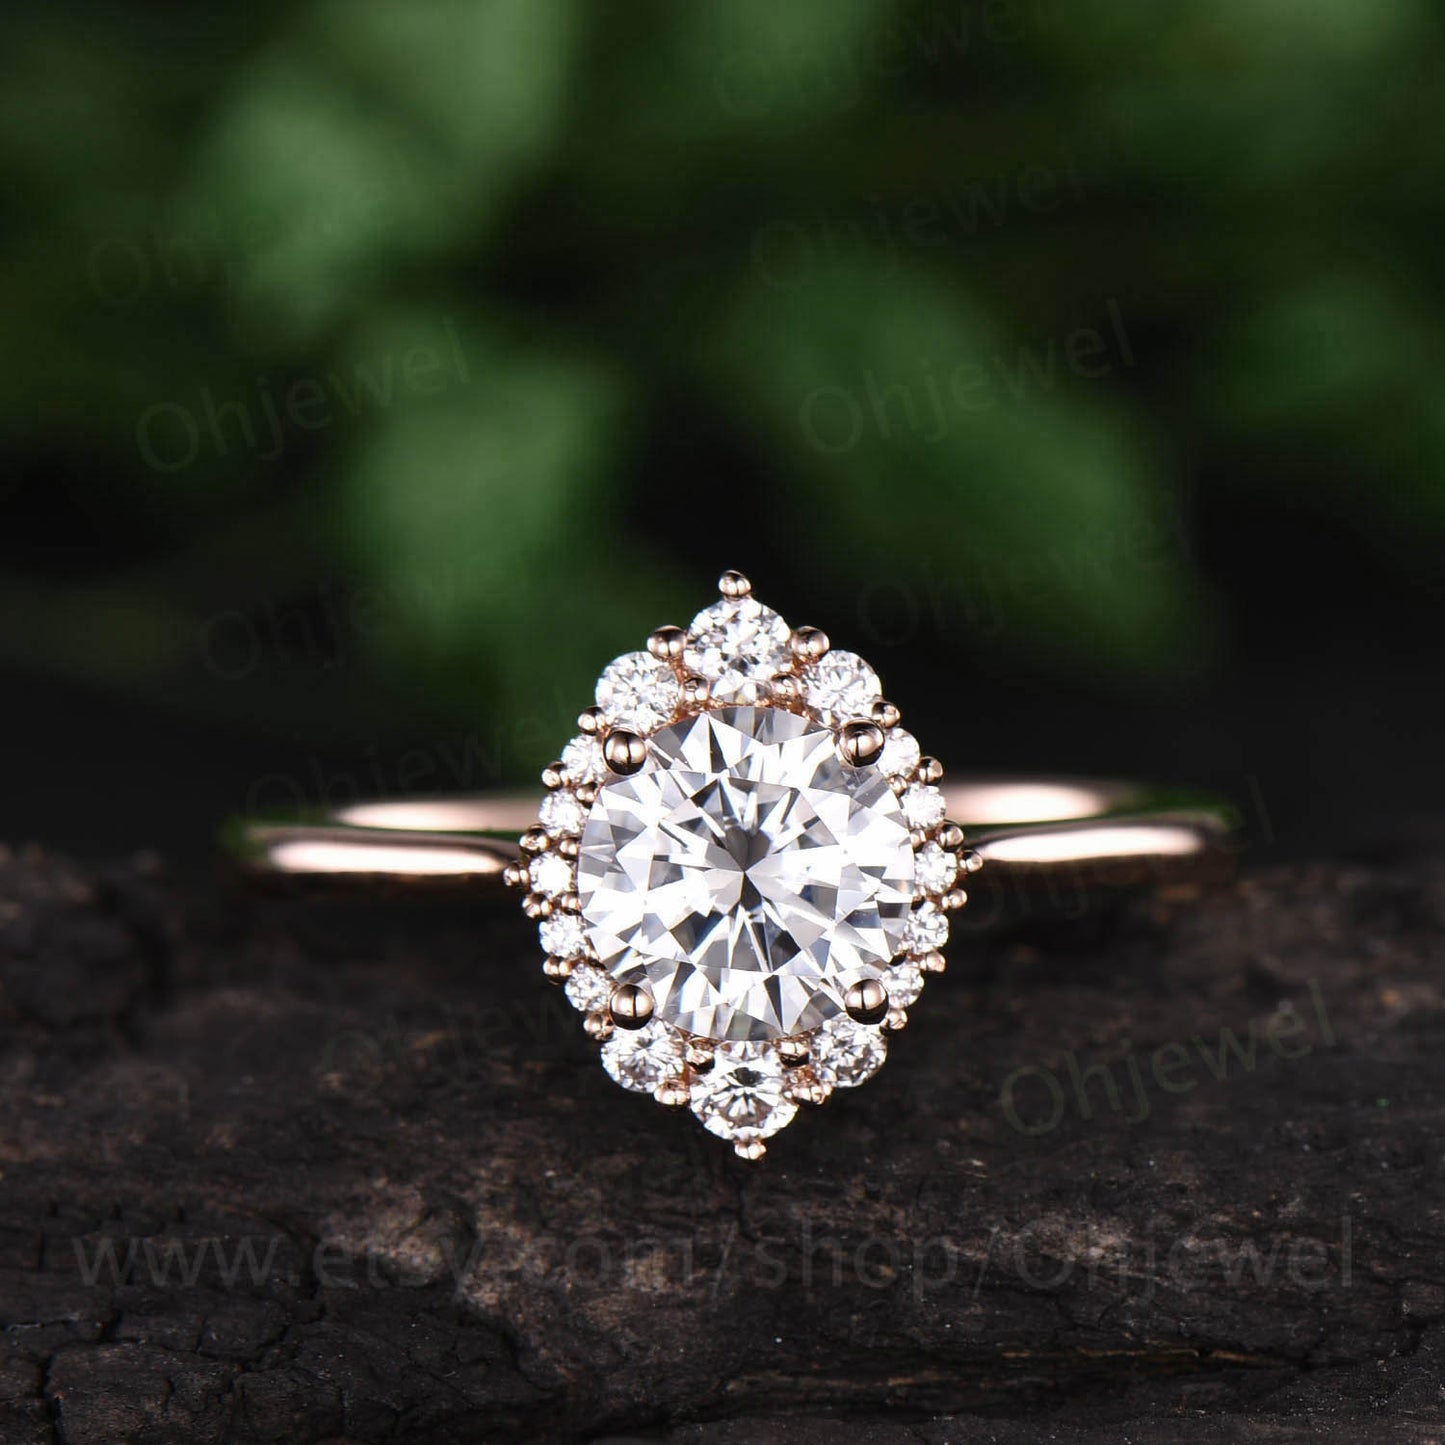 Vintage moissanite engagement ring round 1ct moissanite rings for women rose gold unique halo ring jewelry wedding bridal anniversary gift